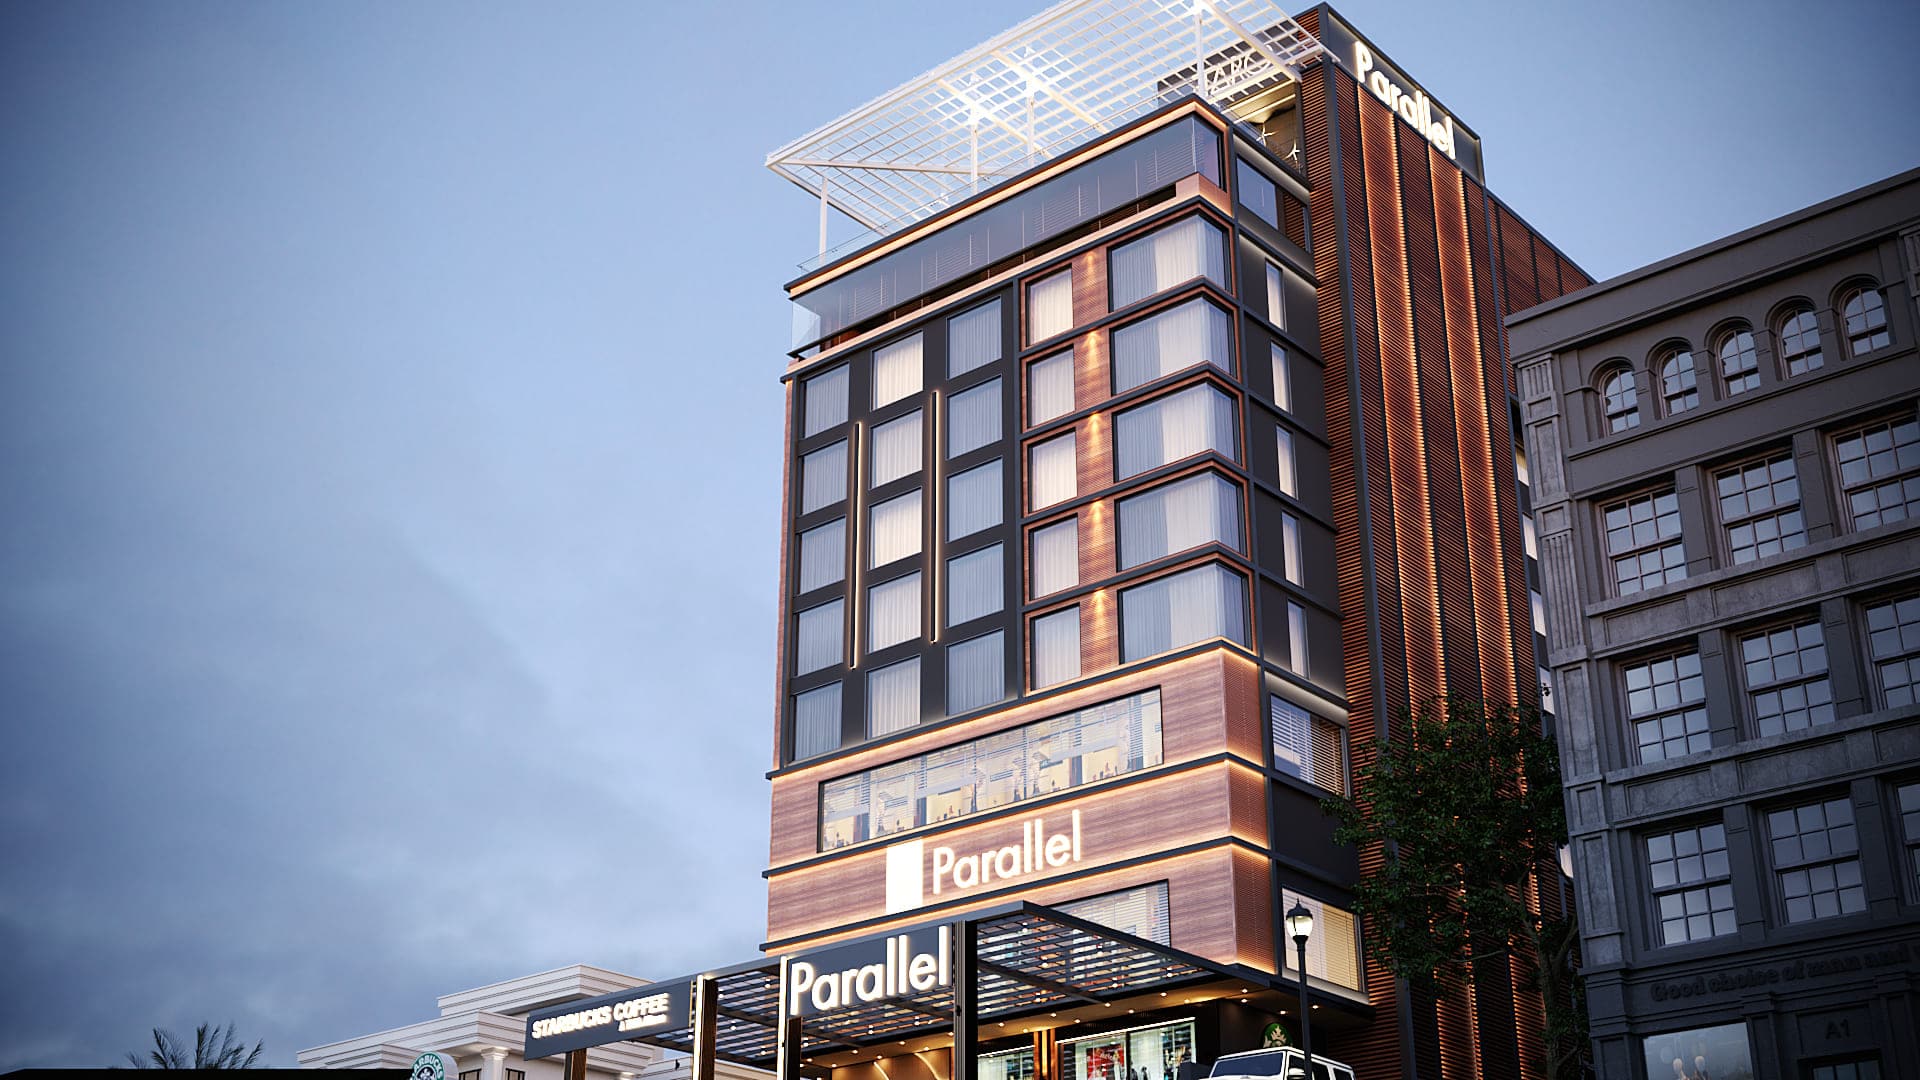 Parallel Hotel- A Stylish Urban Oasis